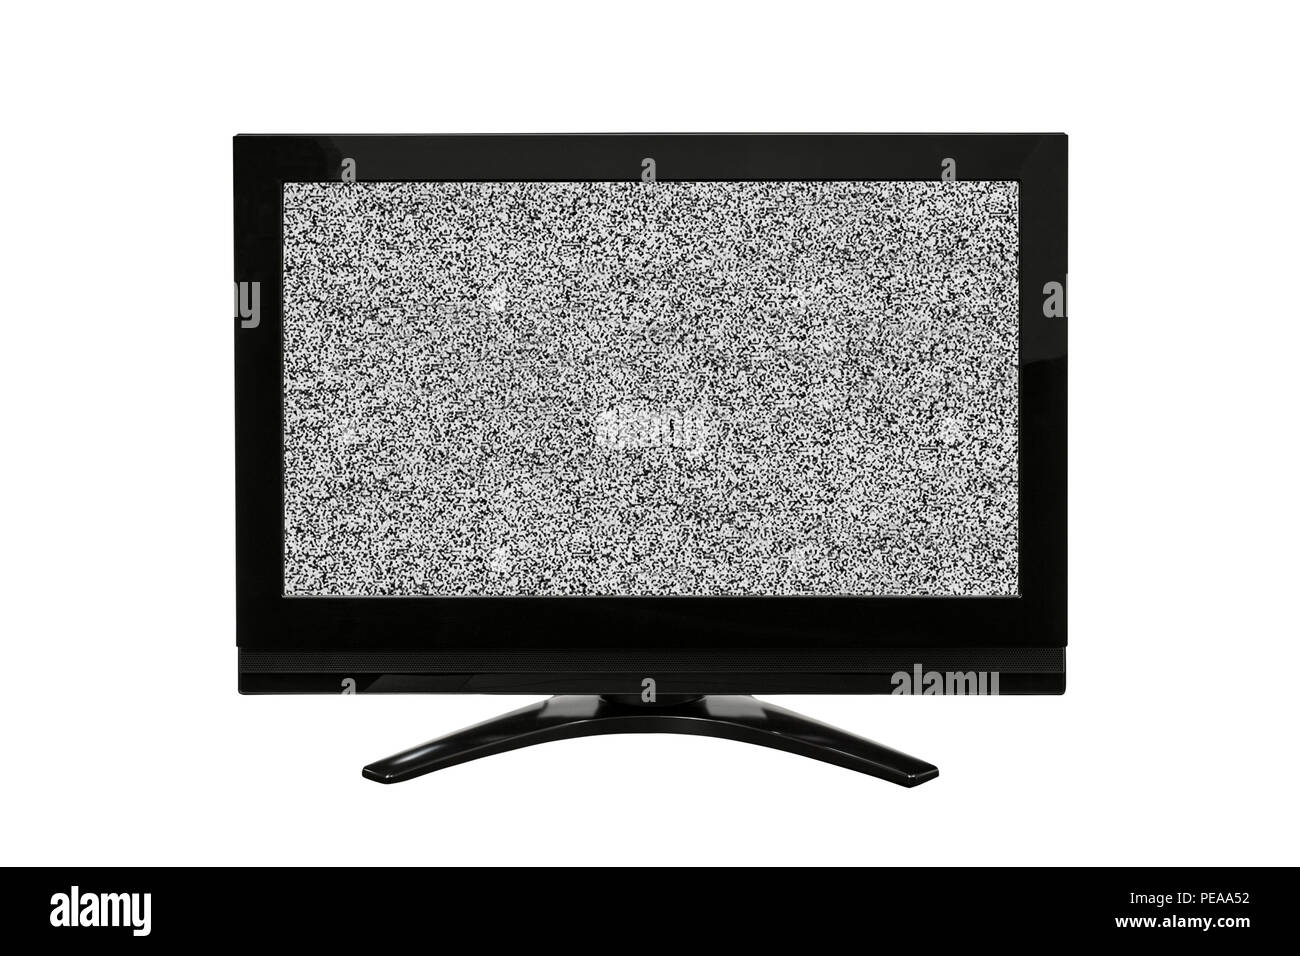 Modern television isolated on white with static screen. Stock Photo